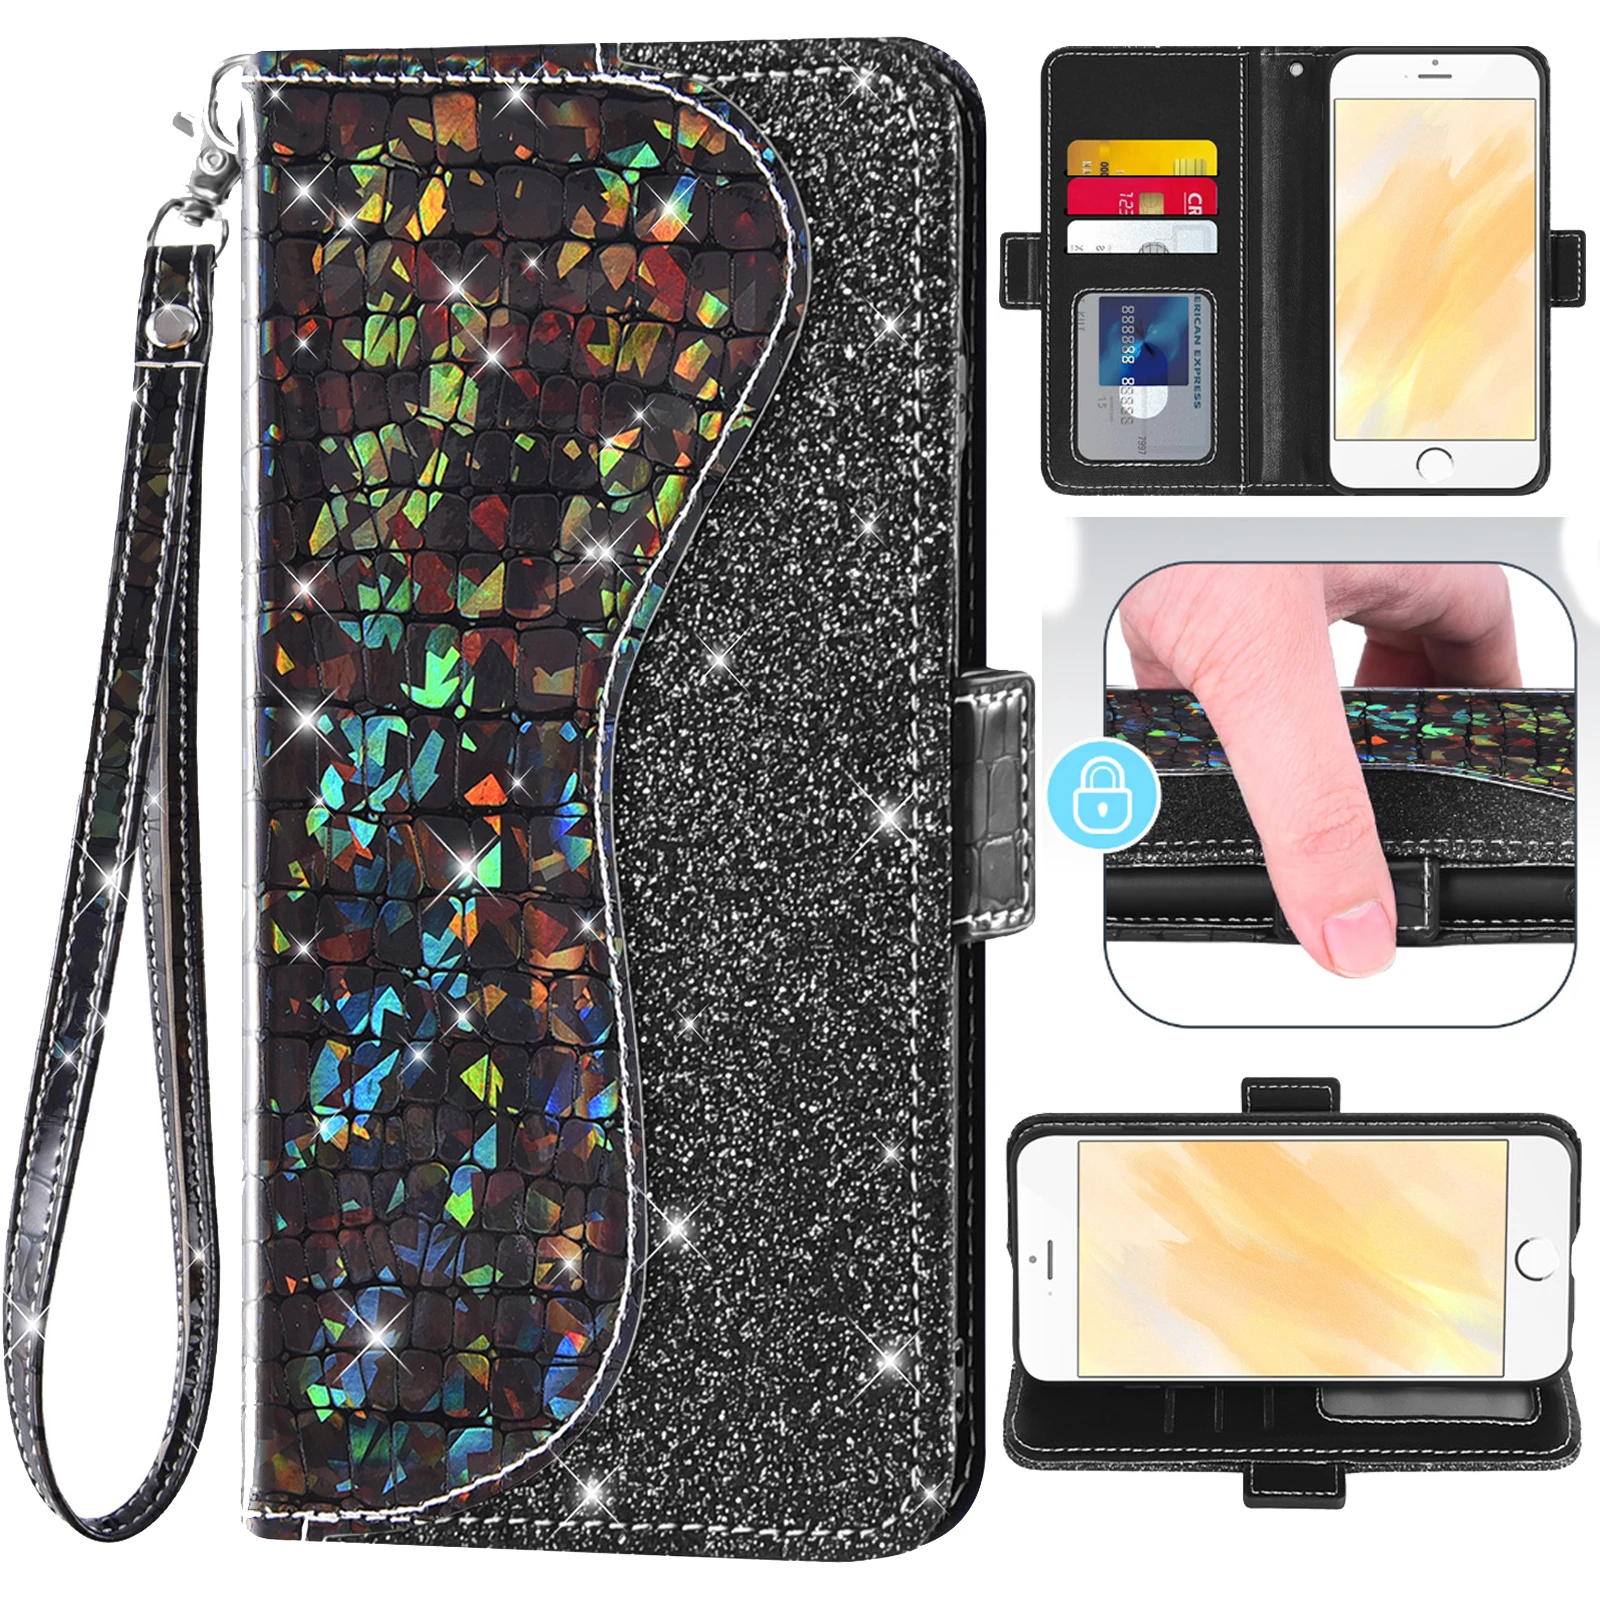 

Sequin Glitter Flip Cover Leather Wallet Phone Case For BLU View 3 Bl40DL 2 B130DL G91 V91 Max Pro F91 5G G91S Bold N2 J9L View3